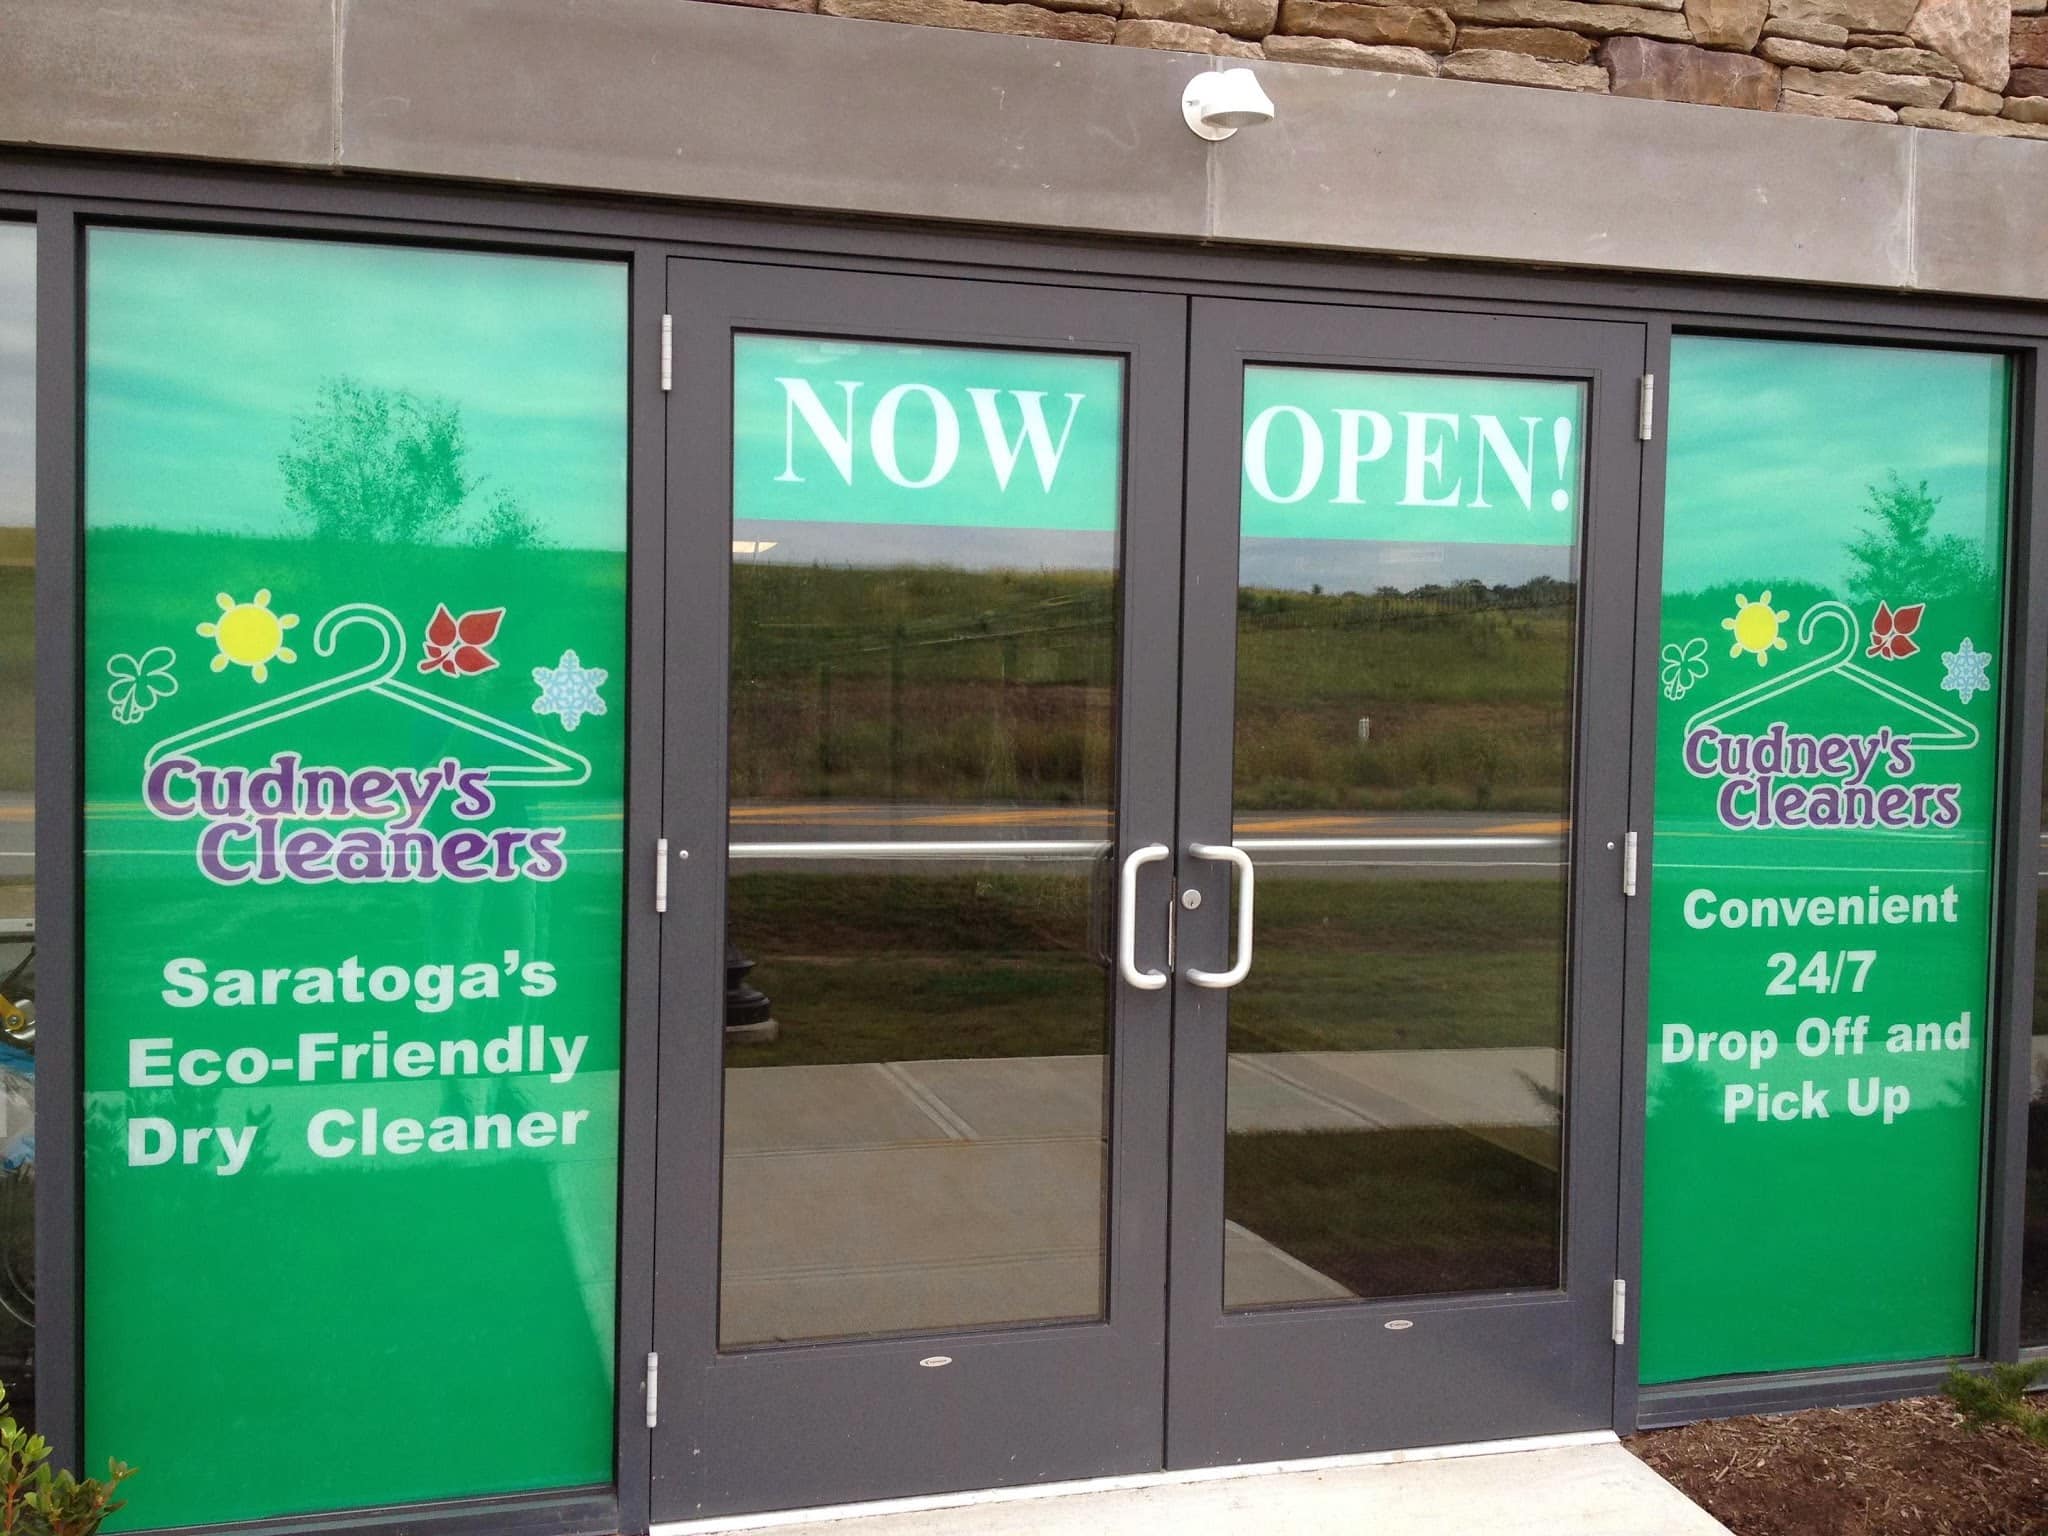 Cudney's Launderers & Dry Cleaners - Saratoga Springs, NY, US, dry cleaners near me